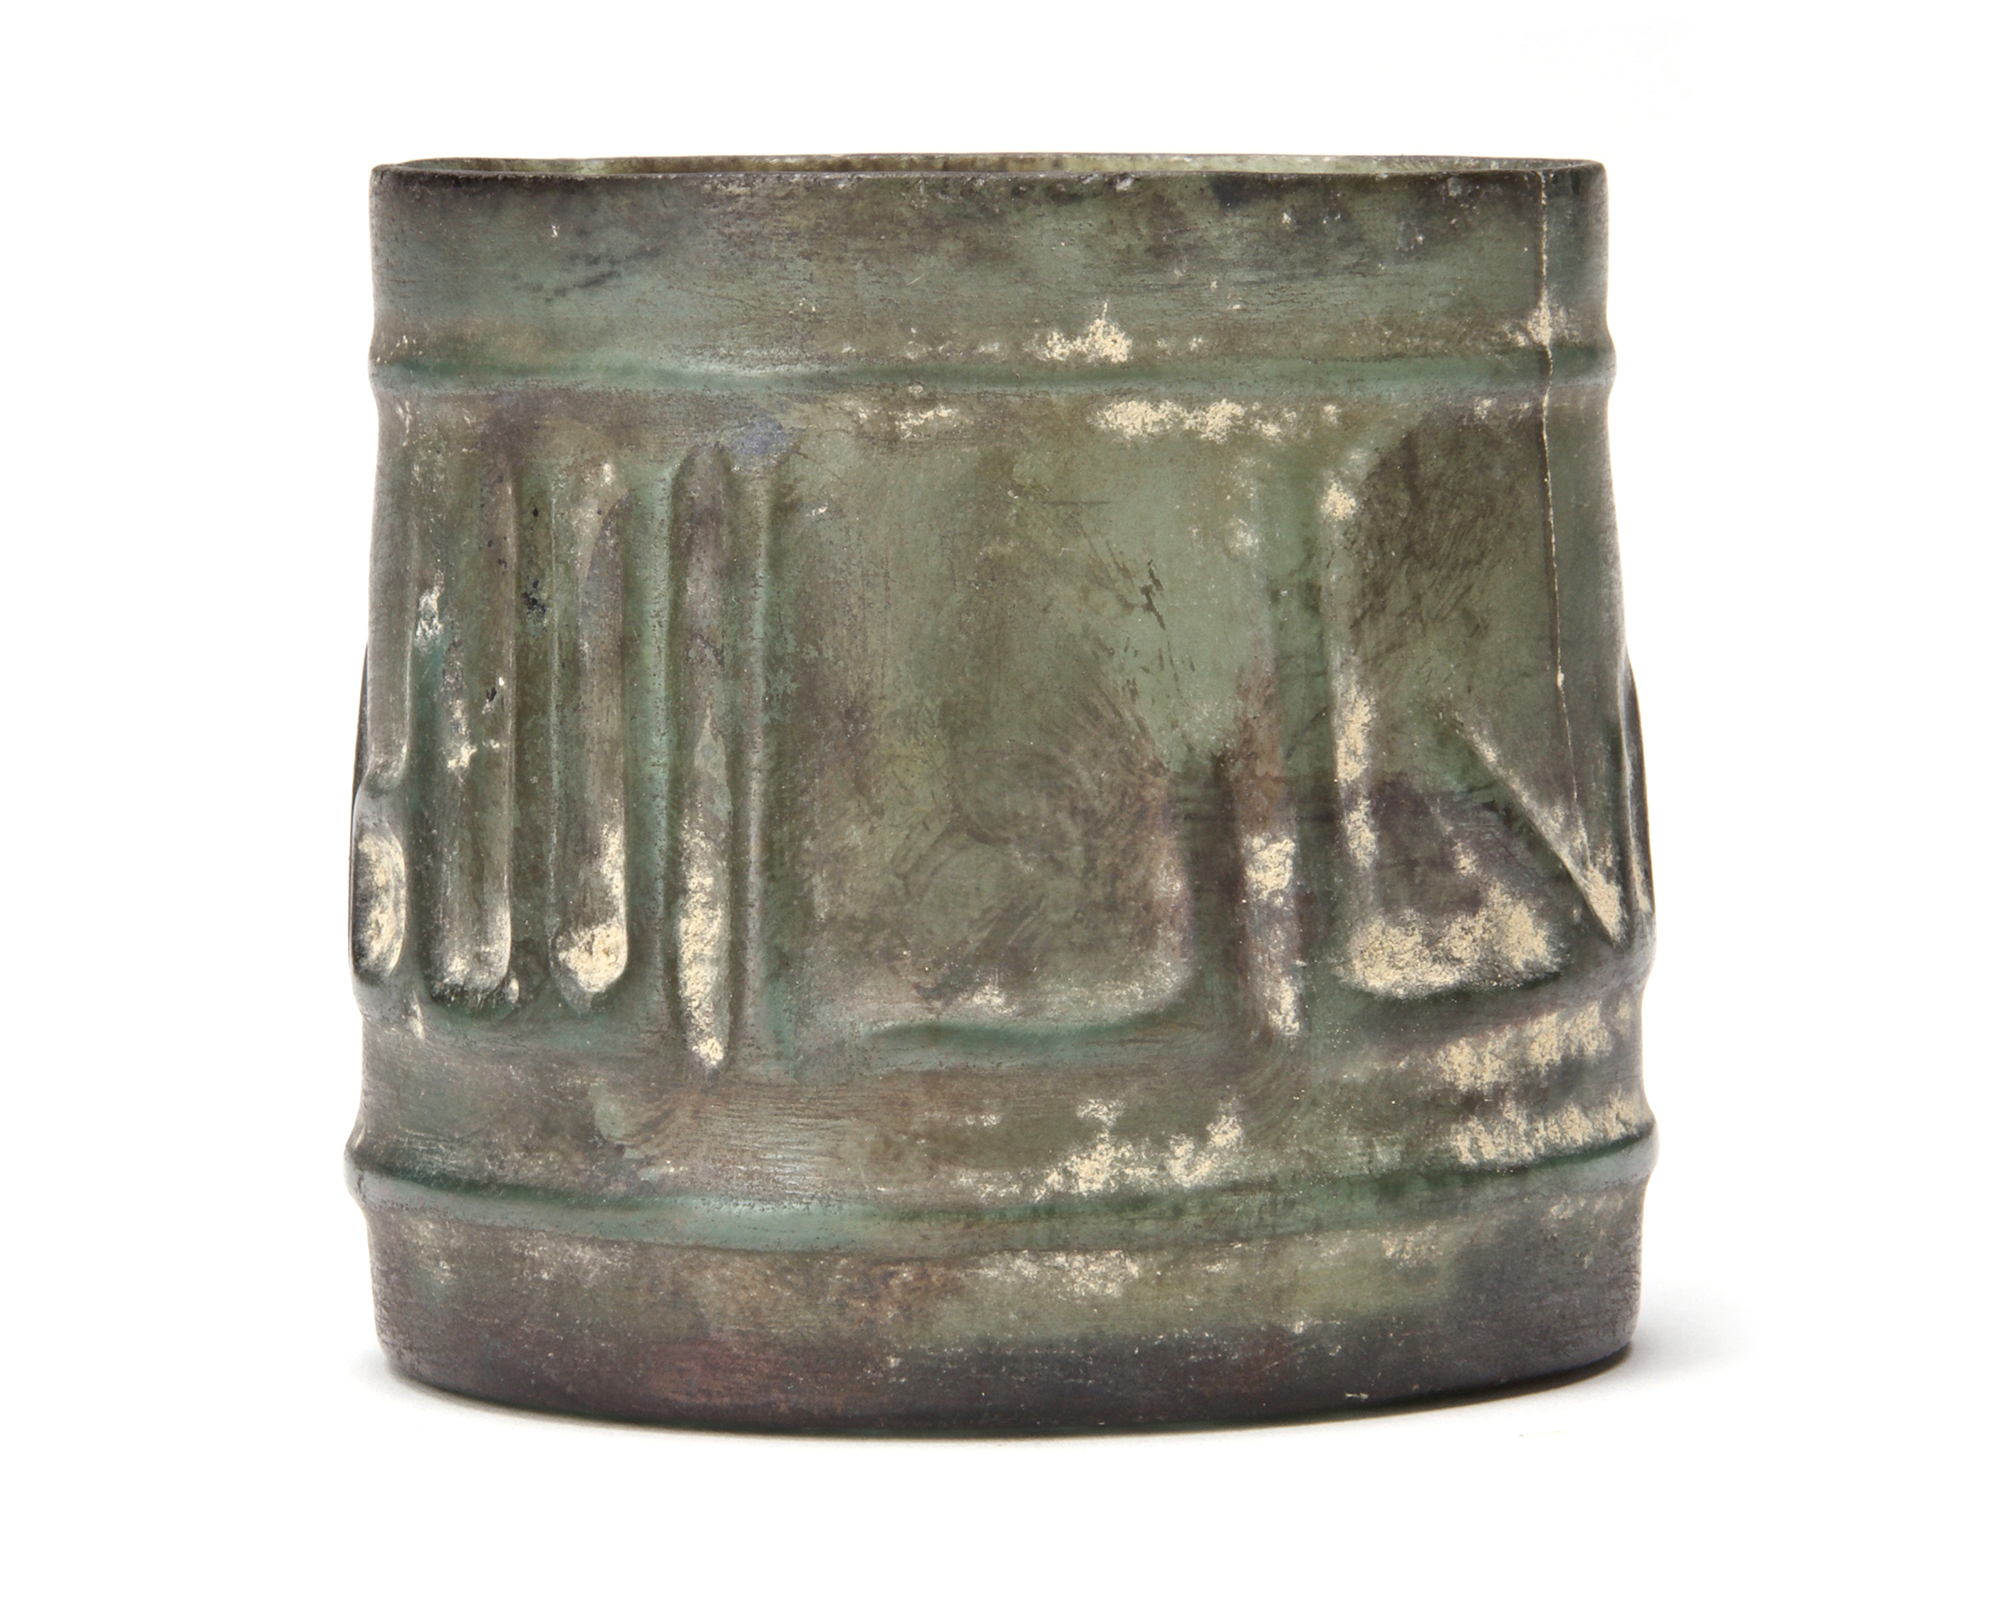 A GLASS BEAKER, SYRIA, 10TH-11TH CENTURY - Image 2 of 14